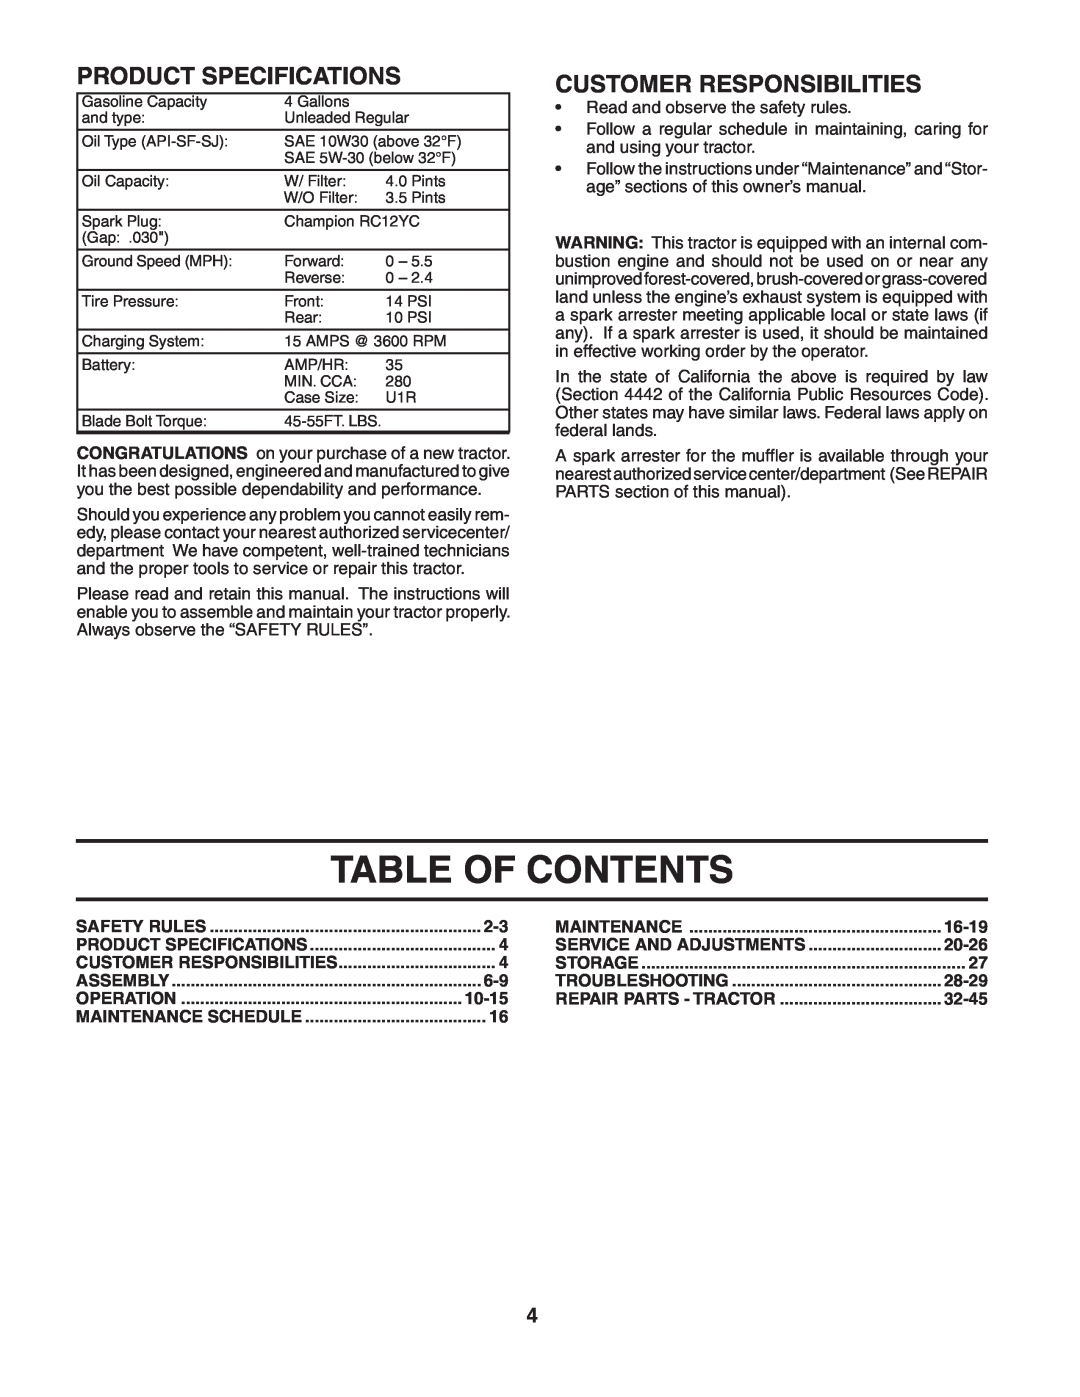 Husqvarna YTH2548 owner manual Table Of Contents, Product Specifications, Customer Responsibilities 